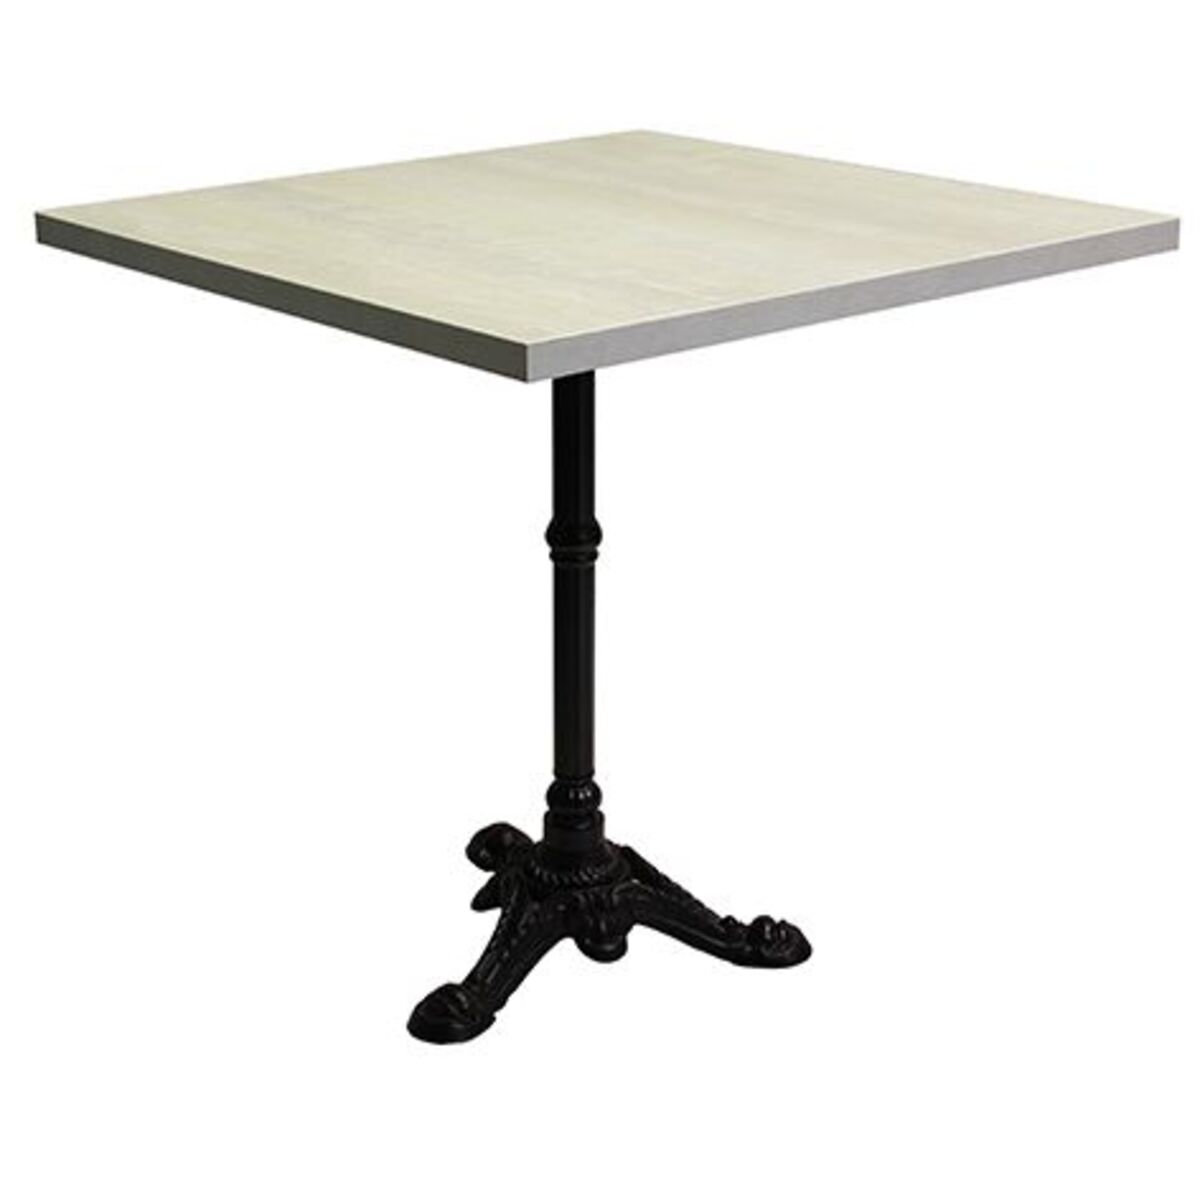 Table int. Pied fonte 3 branches bistrot & plateau tavola blanc 60x60 cm